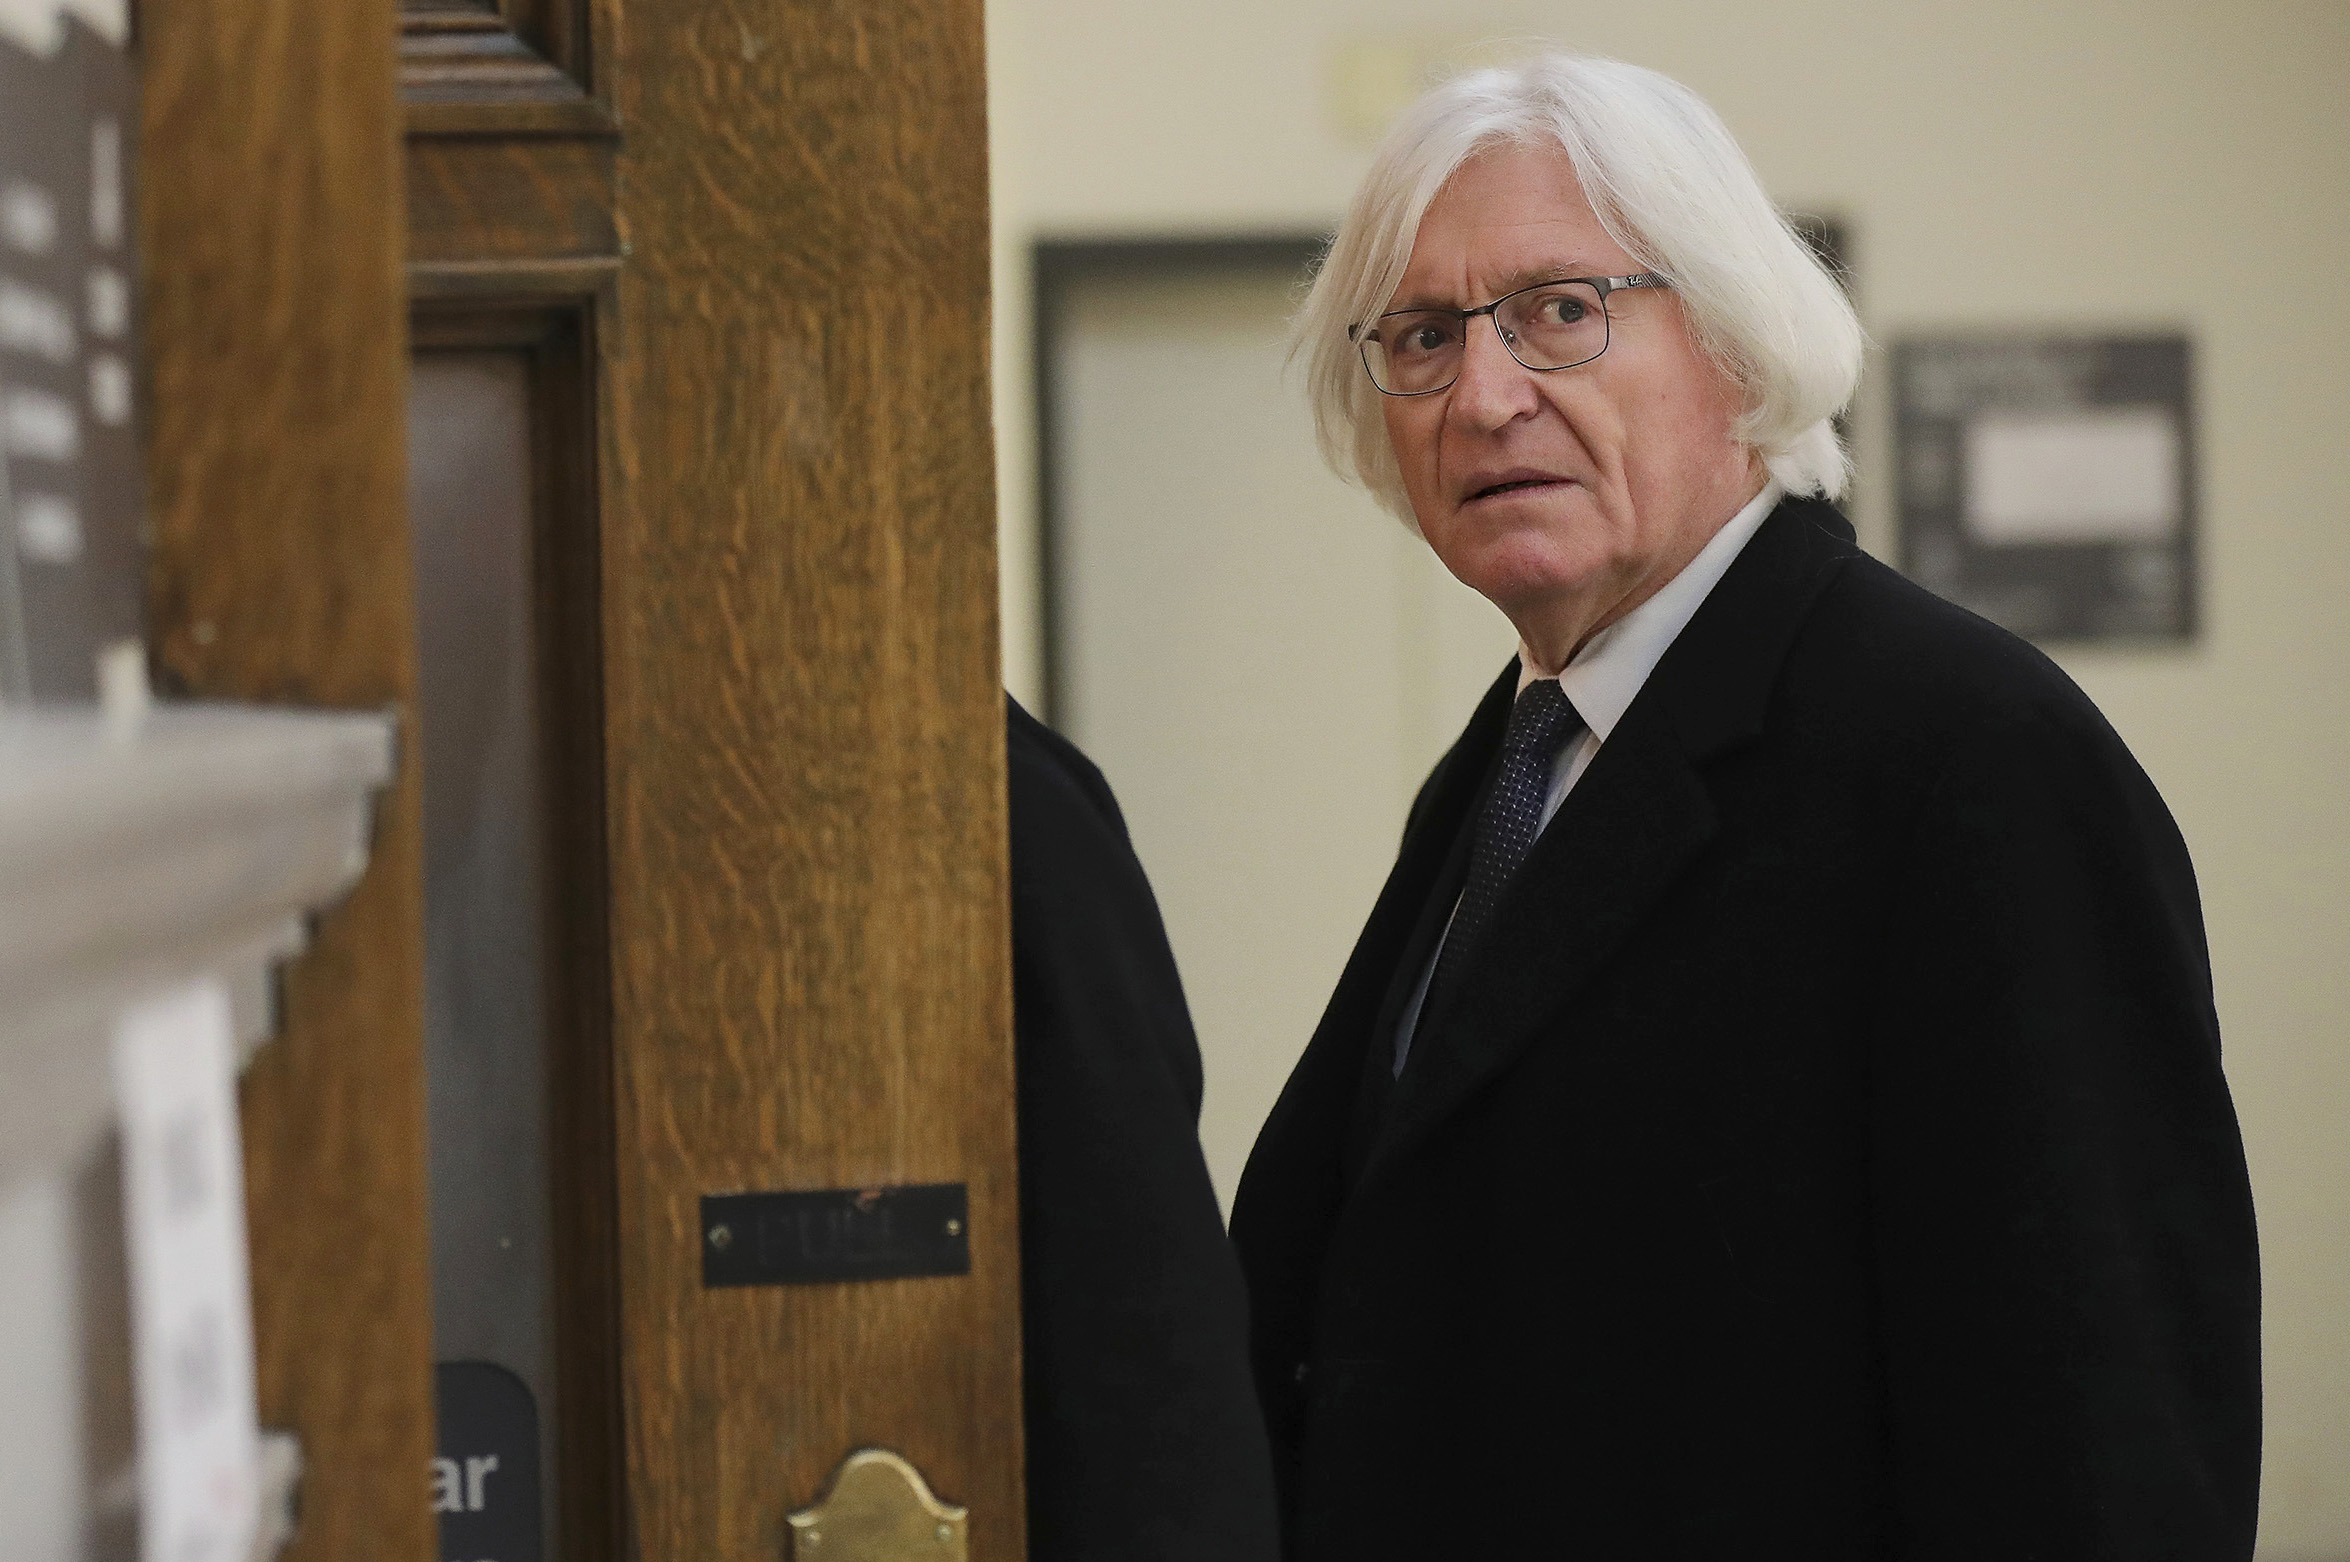 PHOTO: Tom Mesereau, Bill Cosby's lawyer, arrives for Cosby's sexual assault retrial at the Montgomery County Courthouse in Norristown, Pa., on April 10, 2018. 